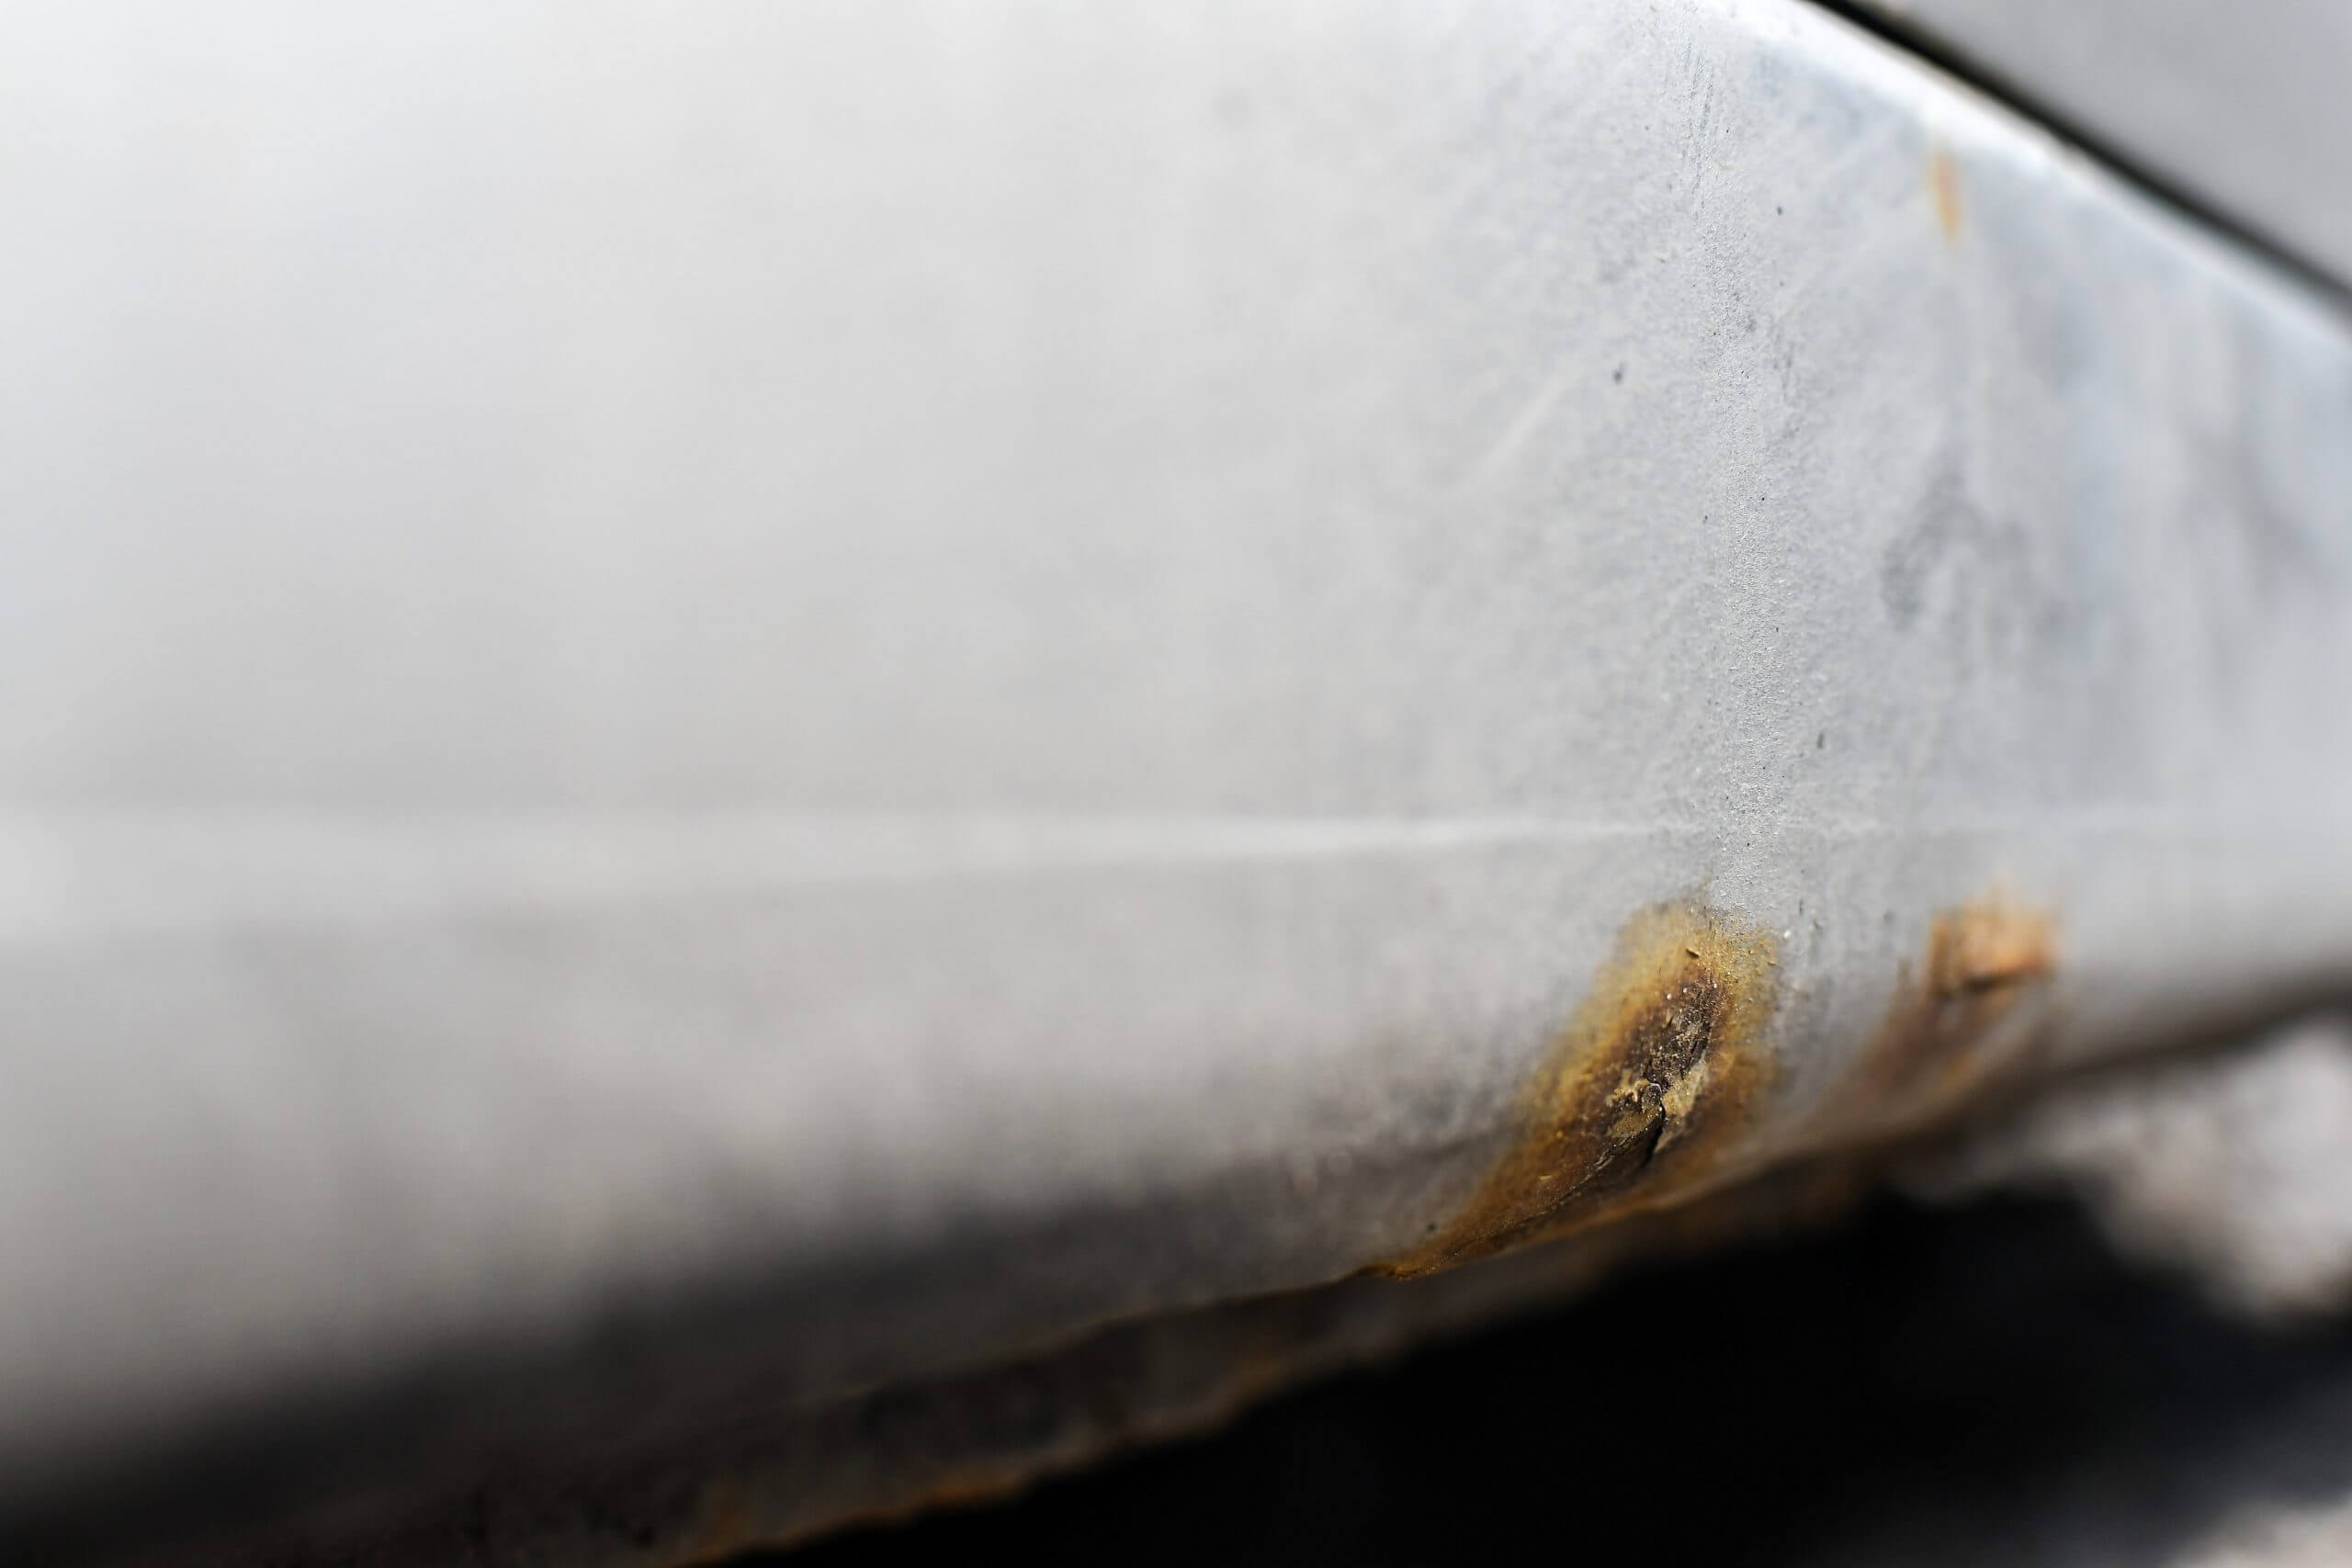 Signs of car corrosion or rust appearing on the bottom of the ca